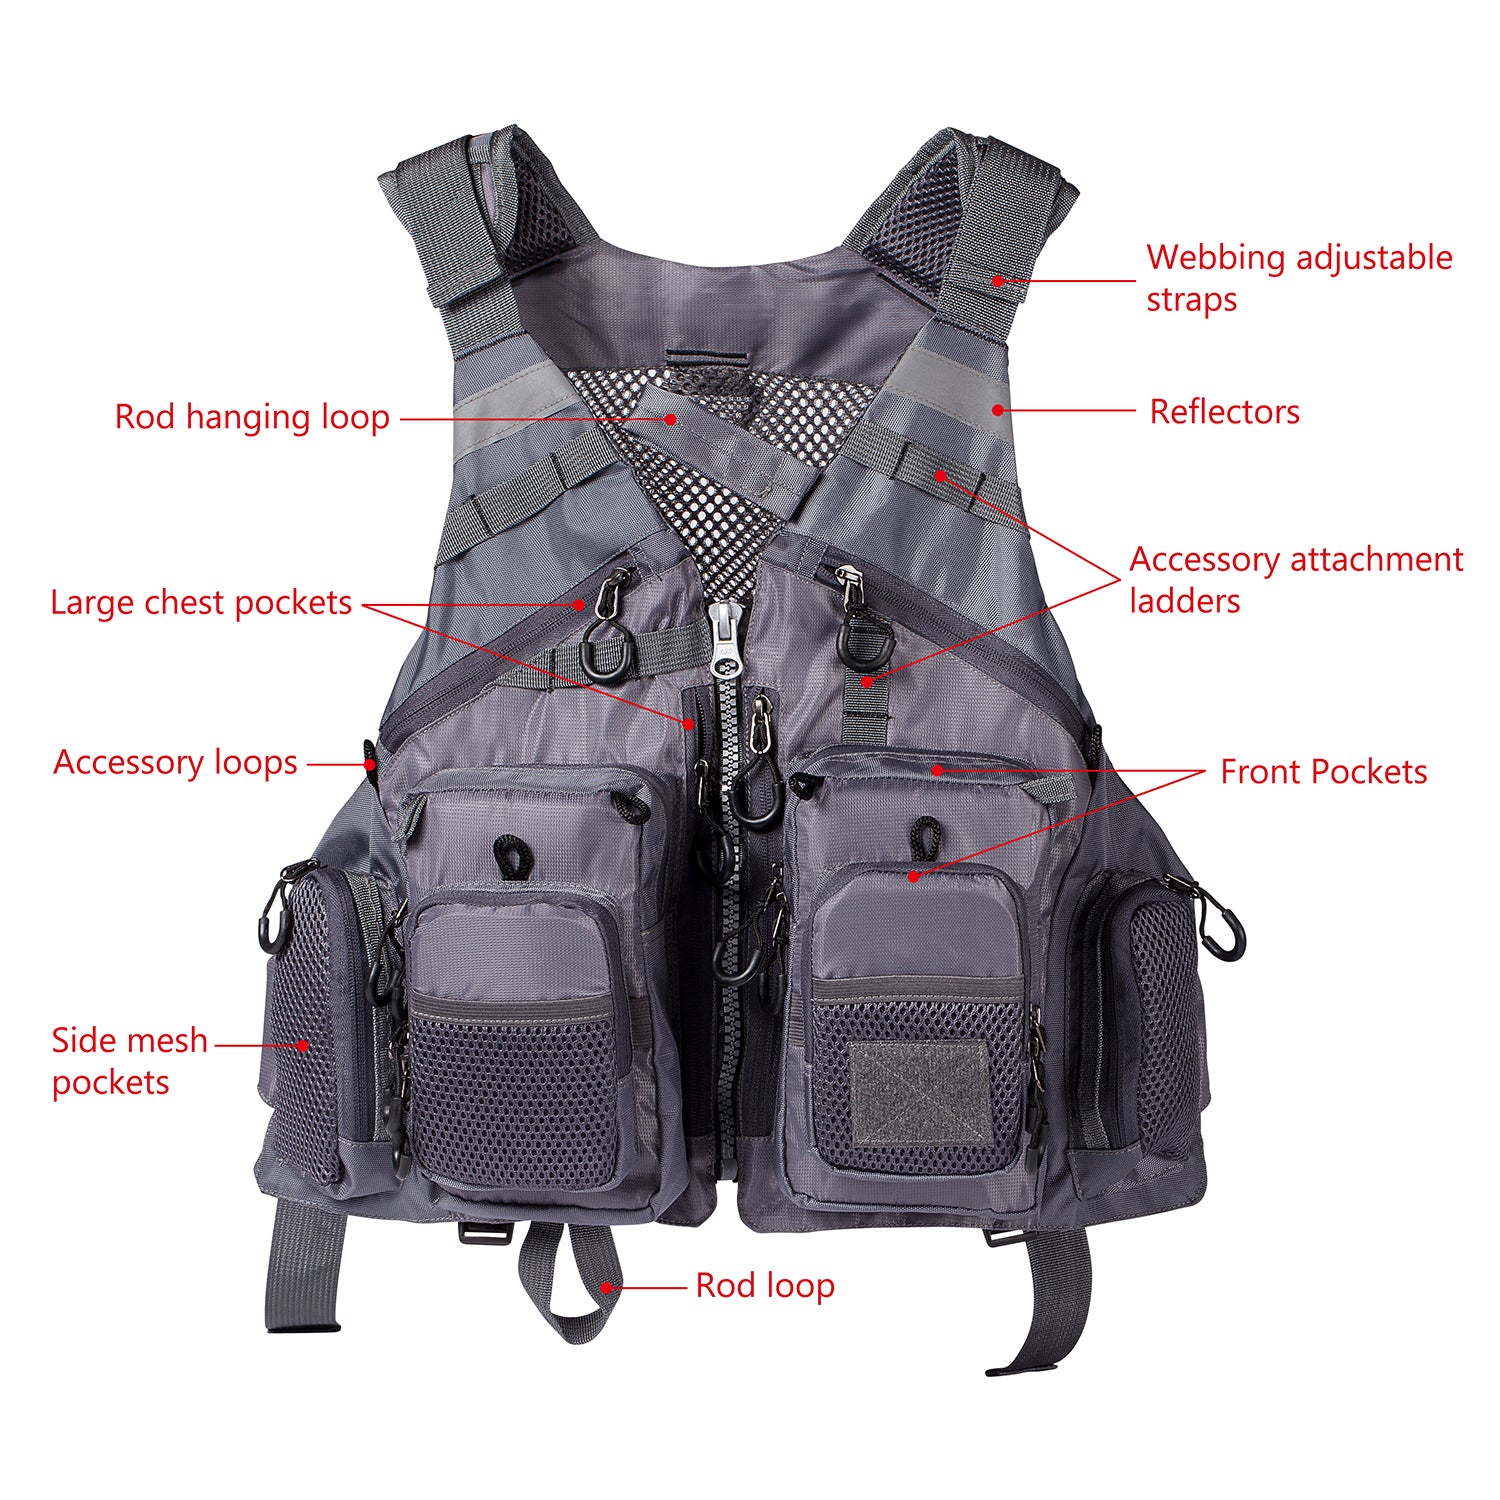 Bassdash Strap Fishing Vest Adjustable for Men and Women for Fly Bass Fishing and Outdoor Activities, Grey, One Size